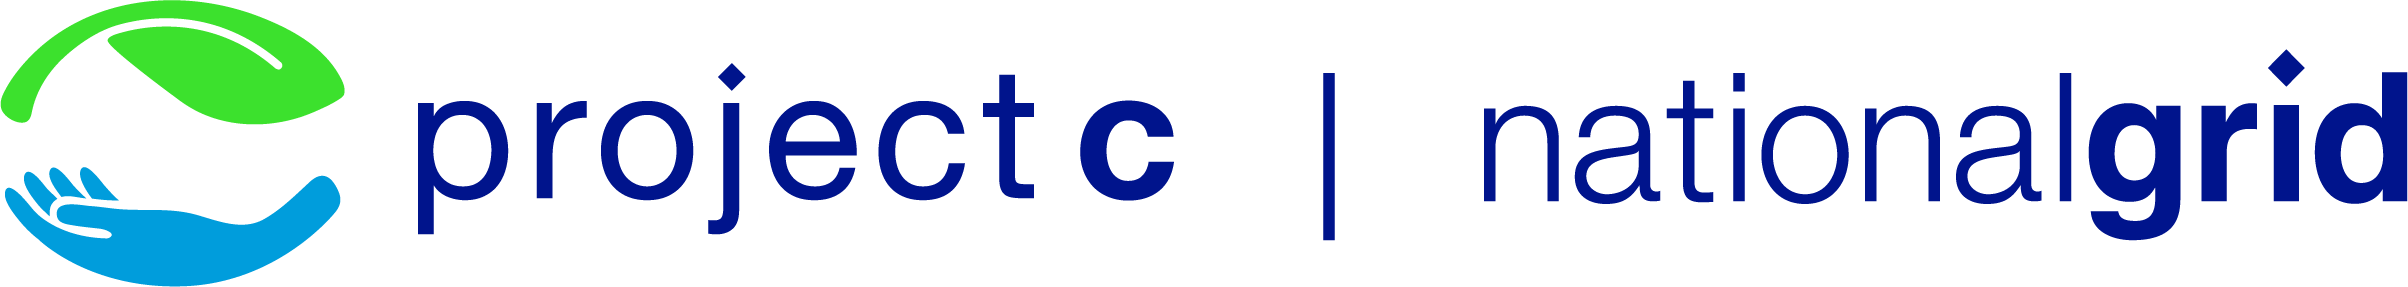 project c national grid logo